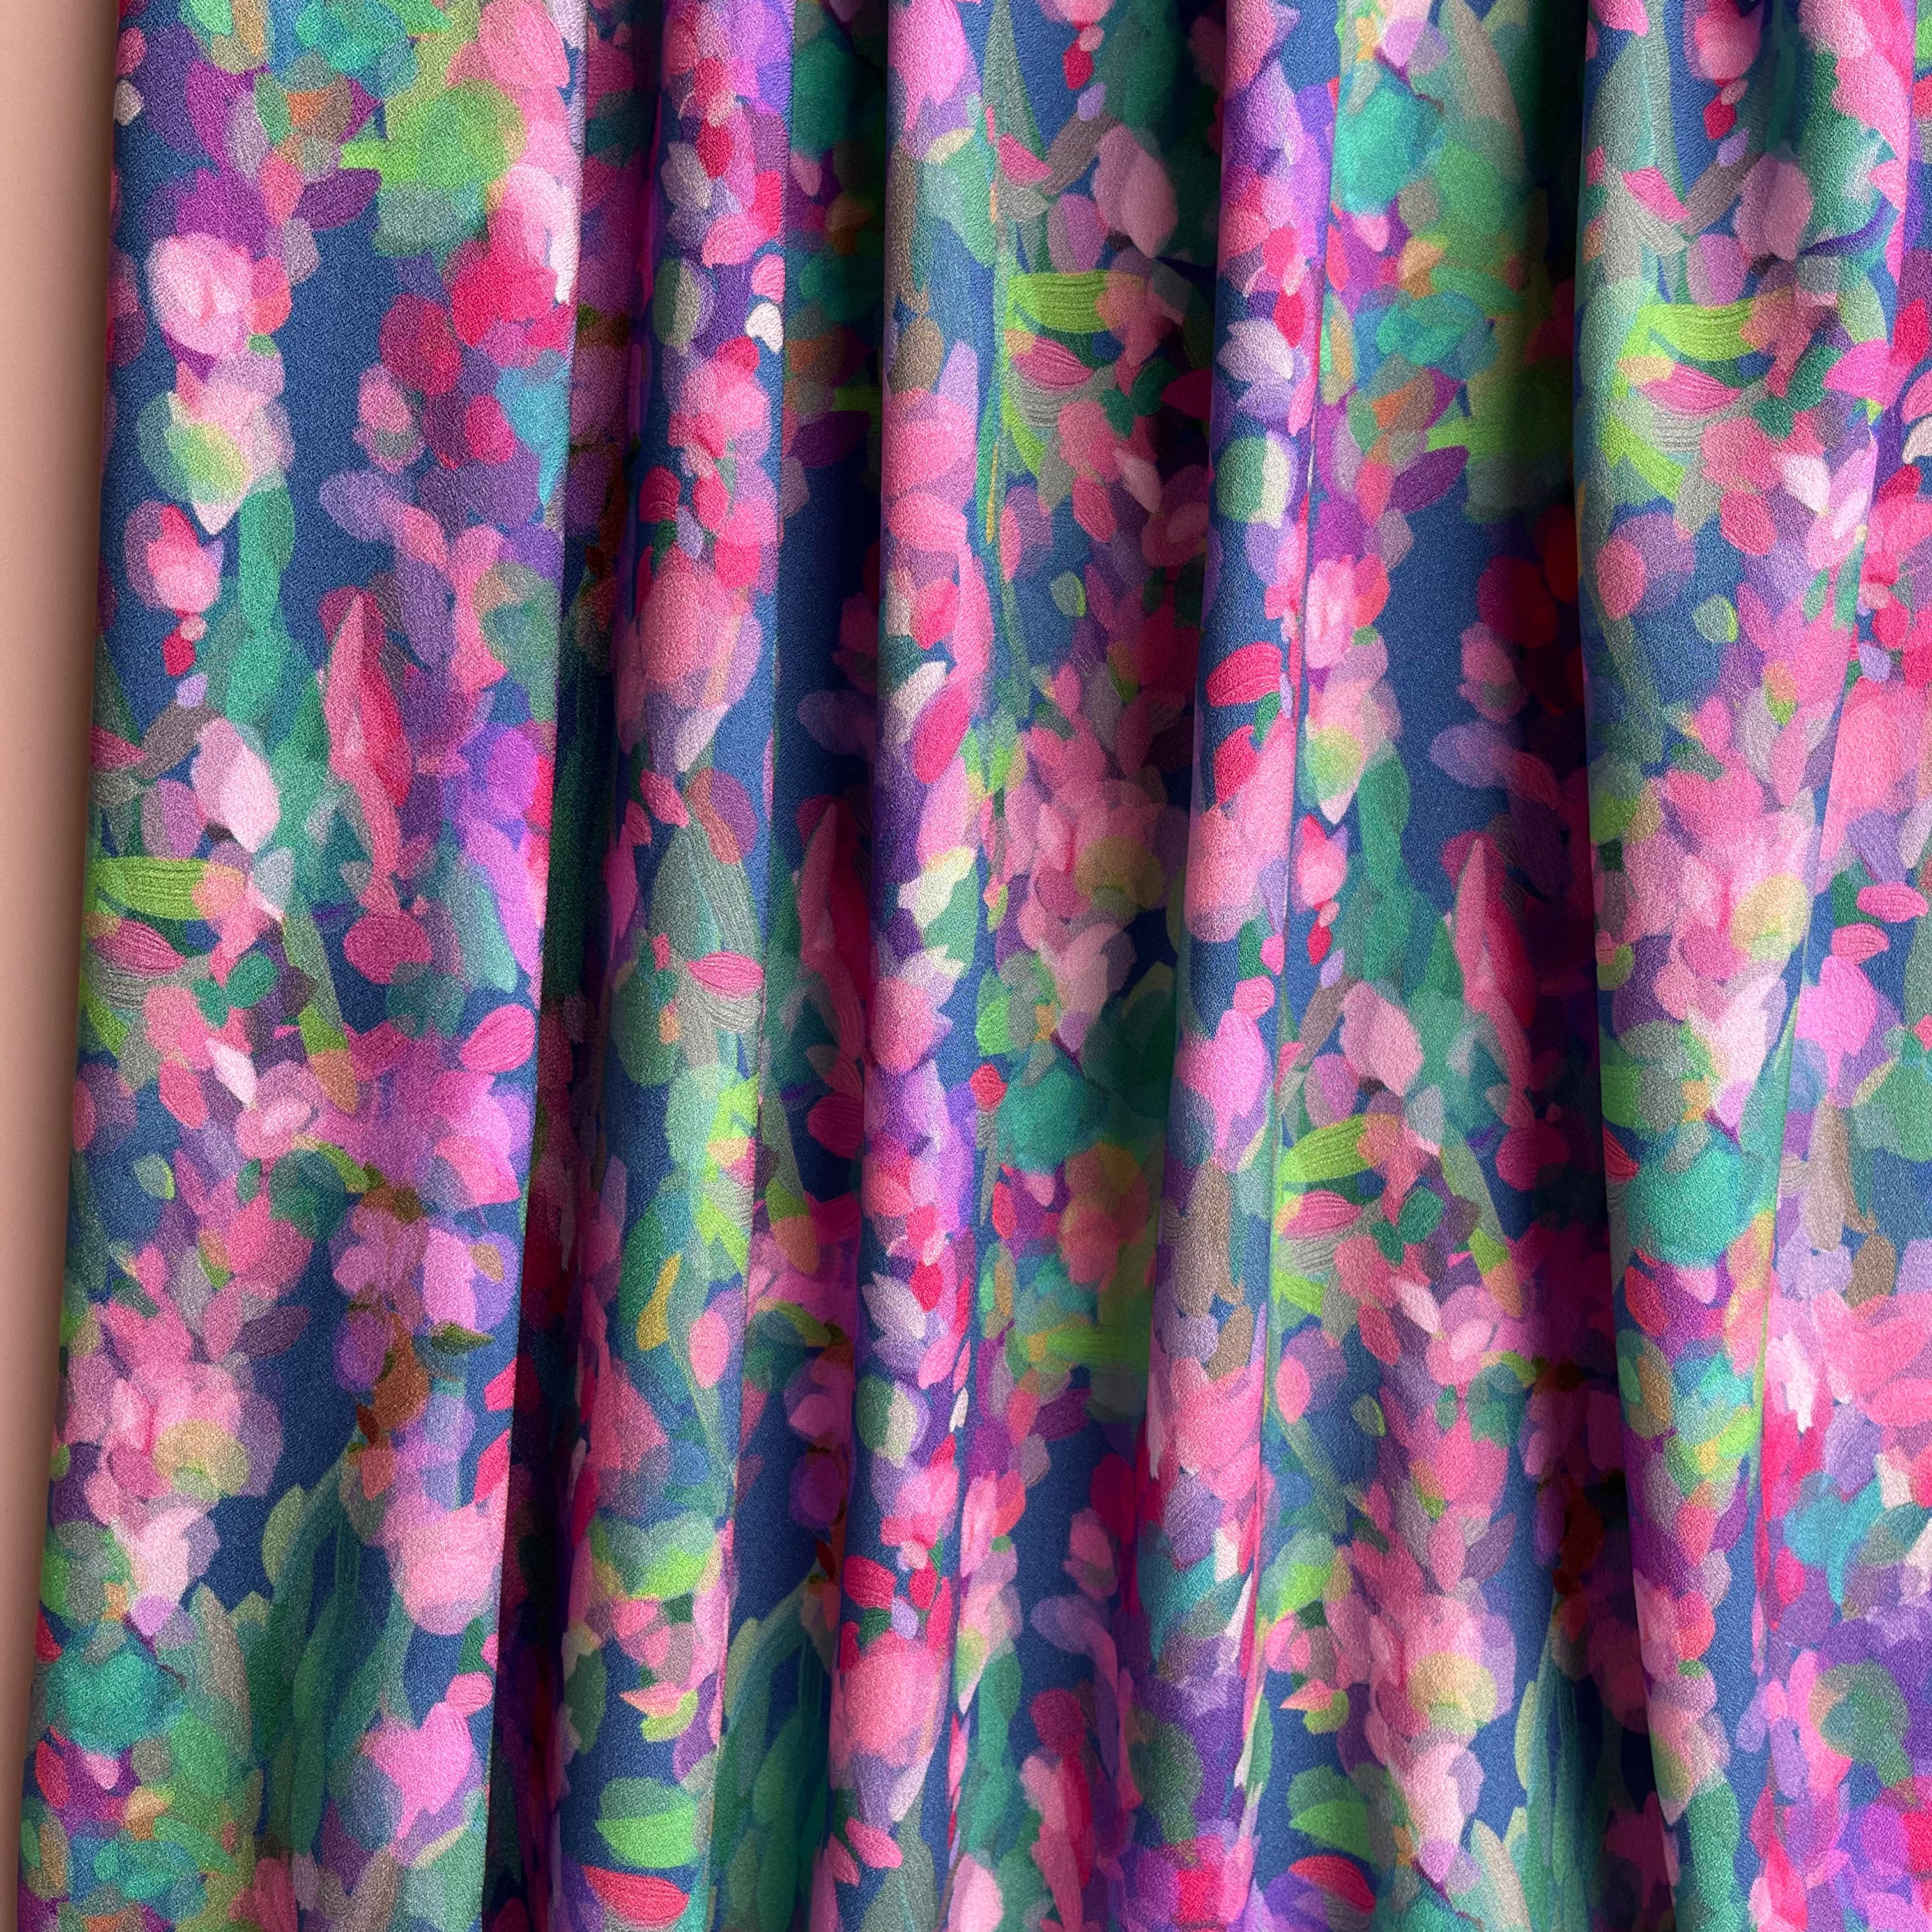 Summer Party - Lupine Petals Blue Morracain Soft Viscose Crepe (more due soon)